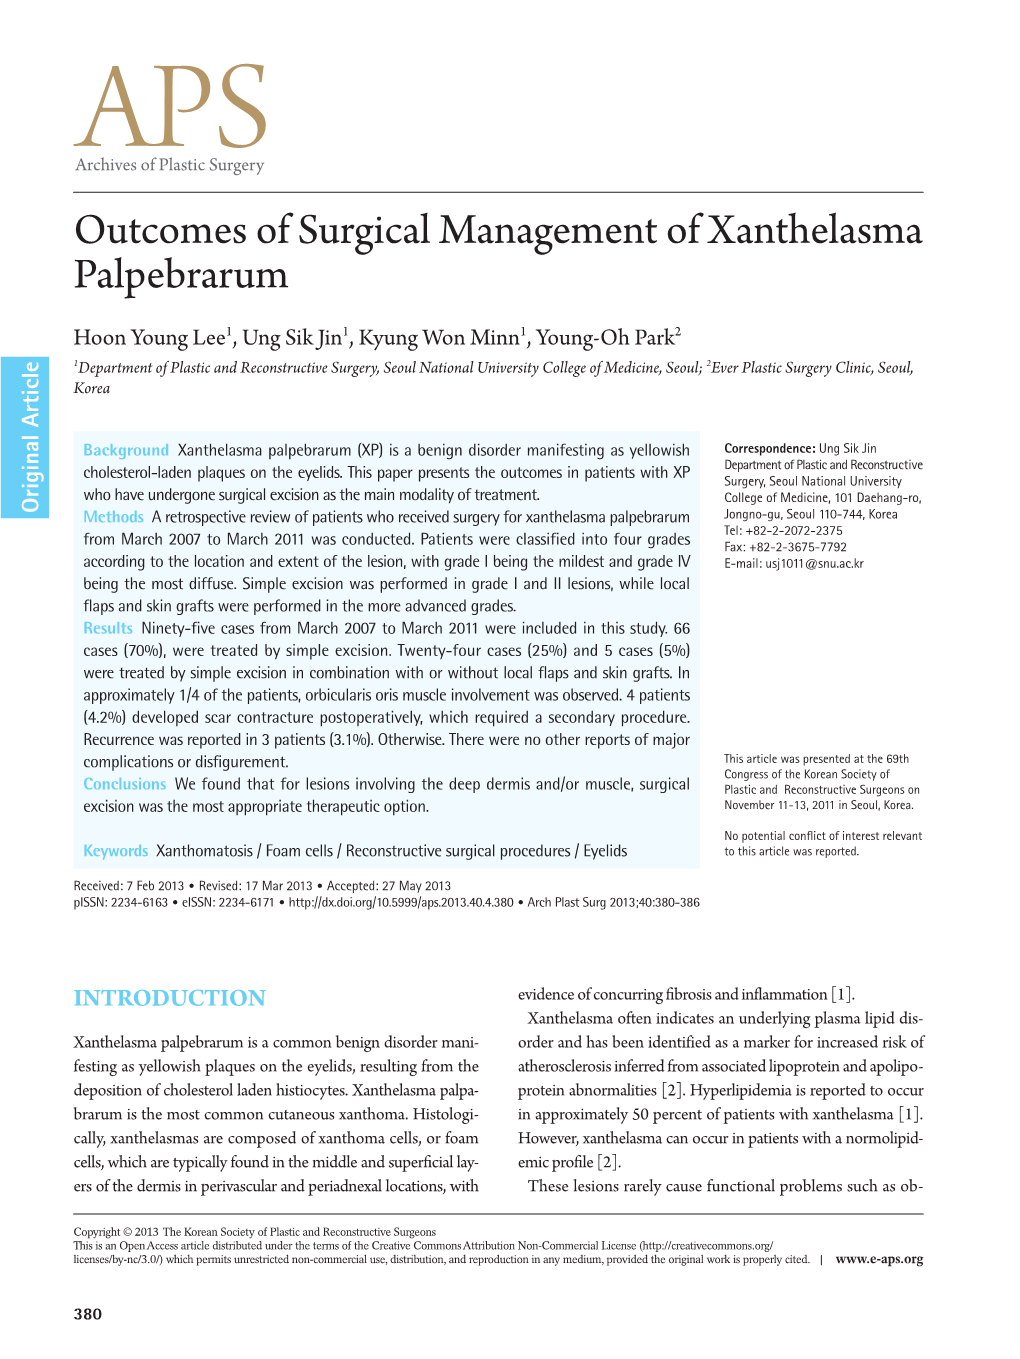 Outcomes of Surgical Management of Xanthelasma Palpebrarum